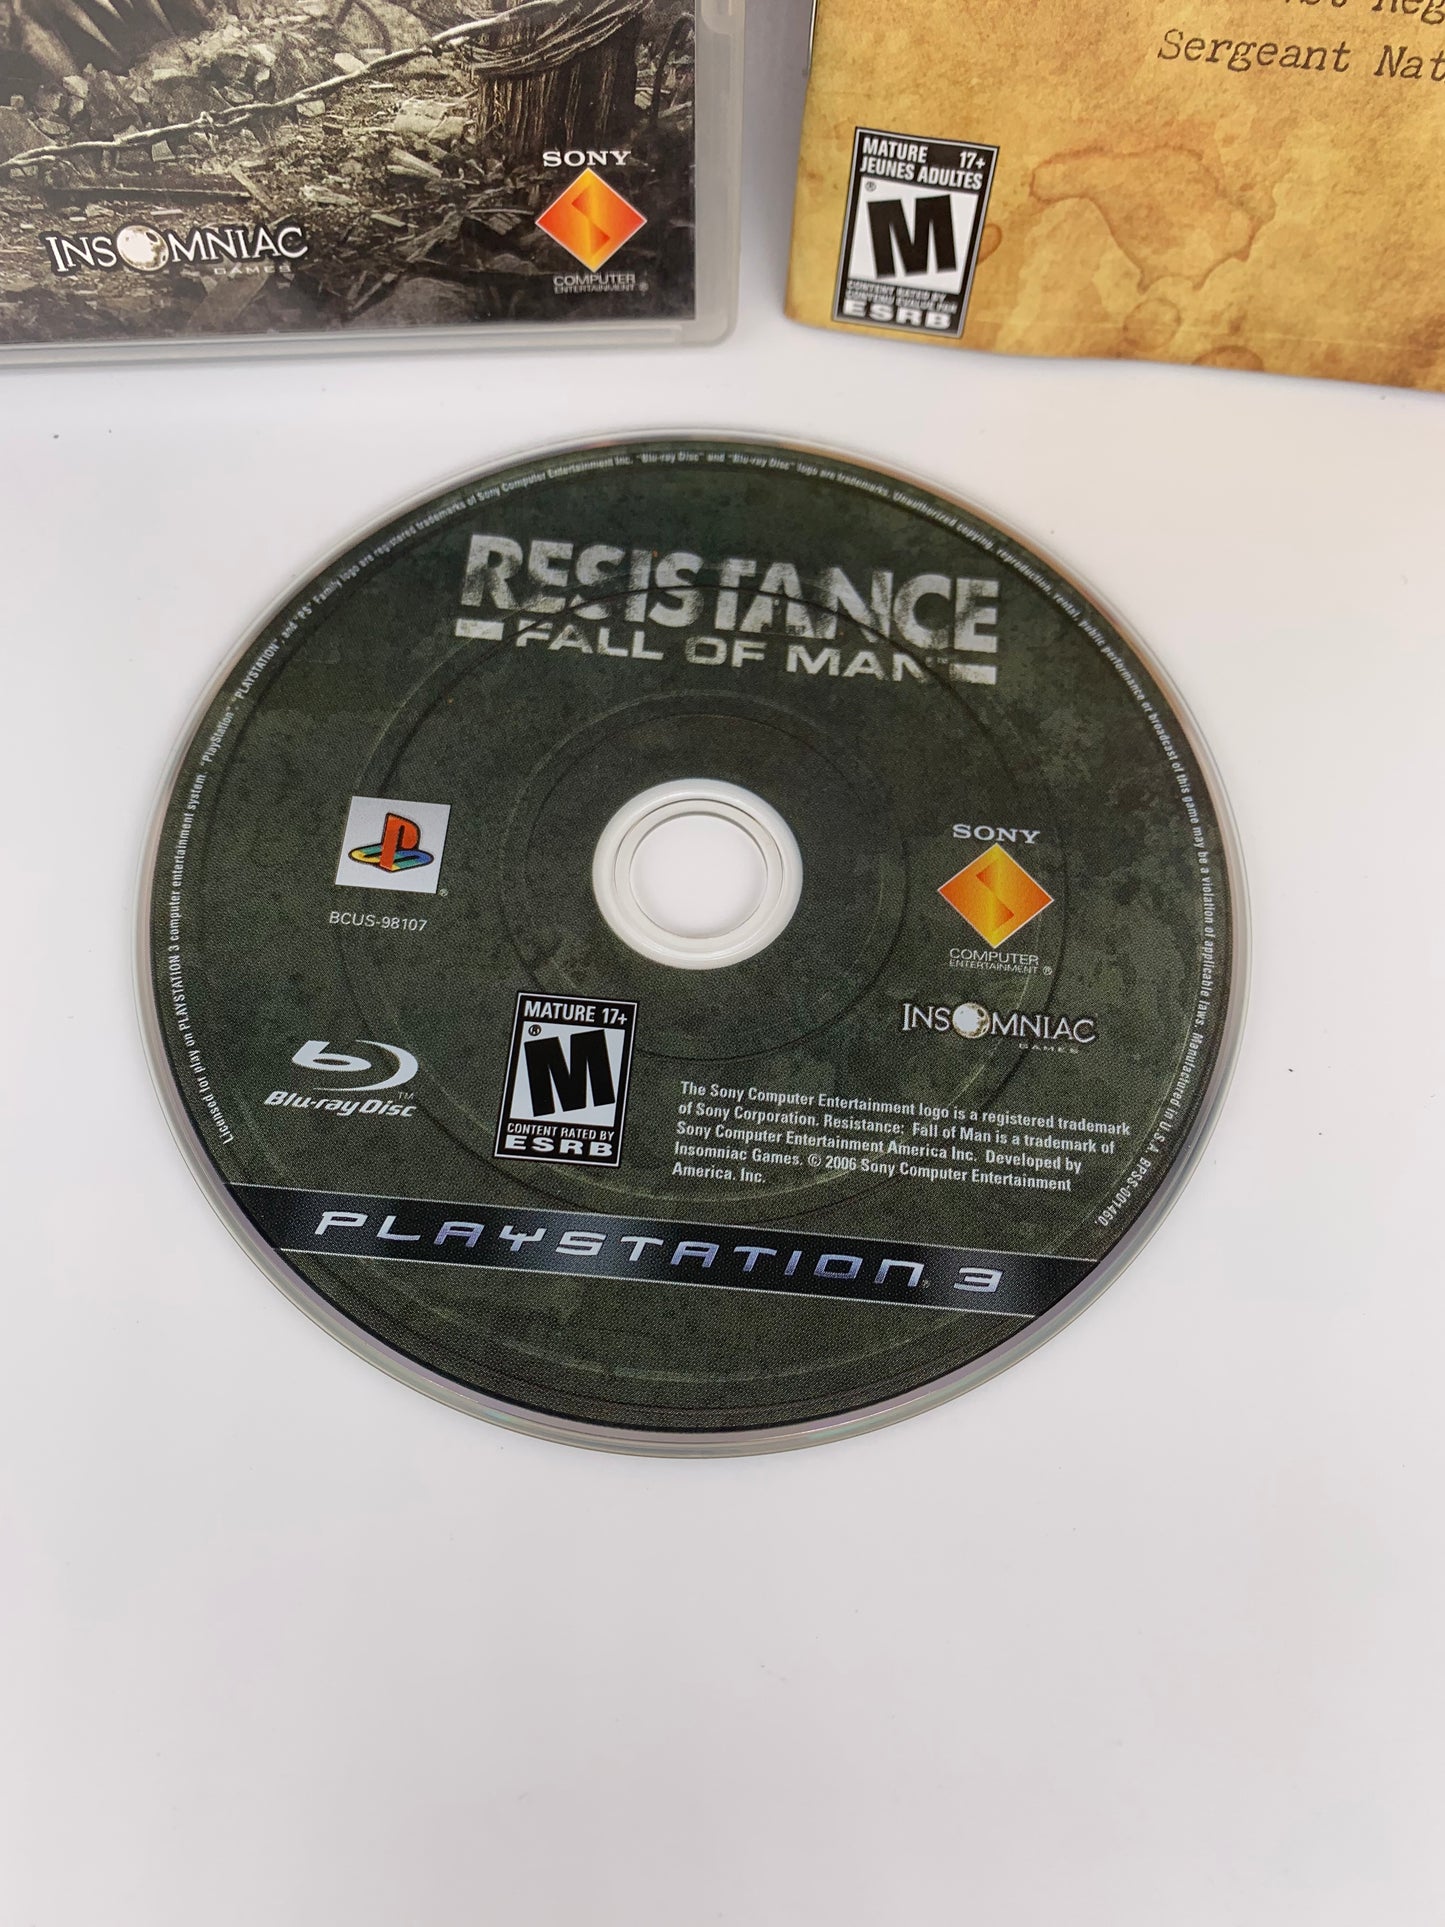 SONY PLAYSTATiON 3 [PS3] | RESiSTANCE FALL OF MAN